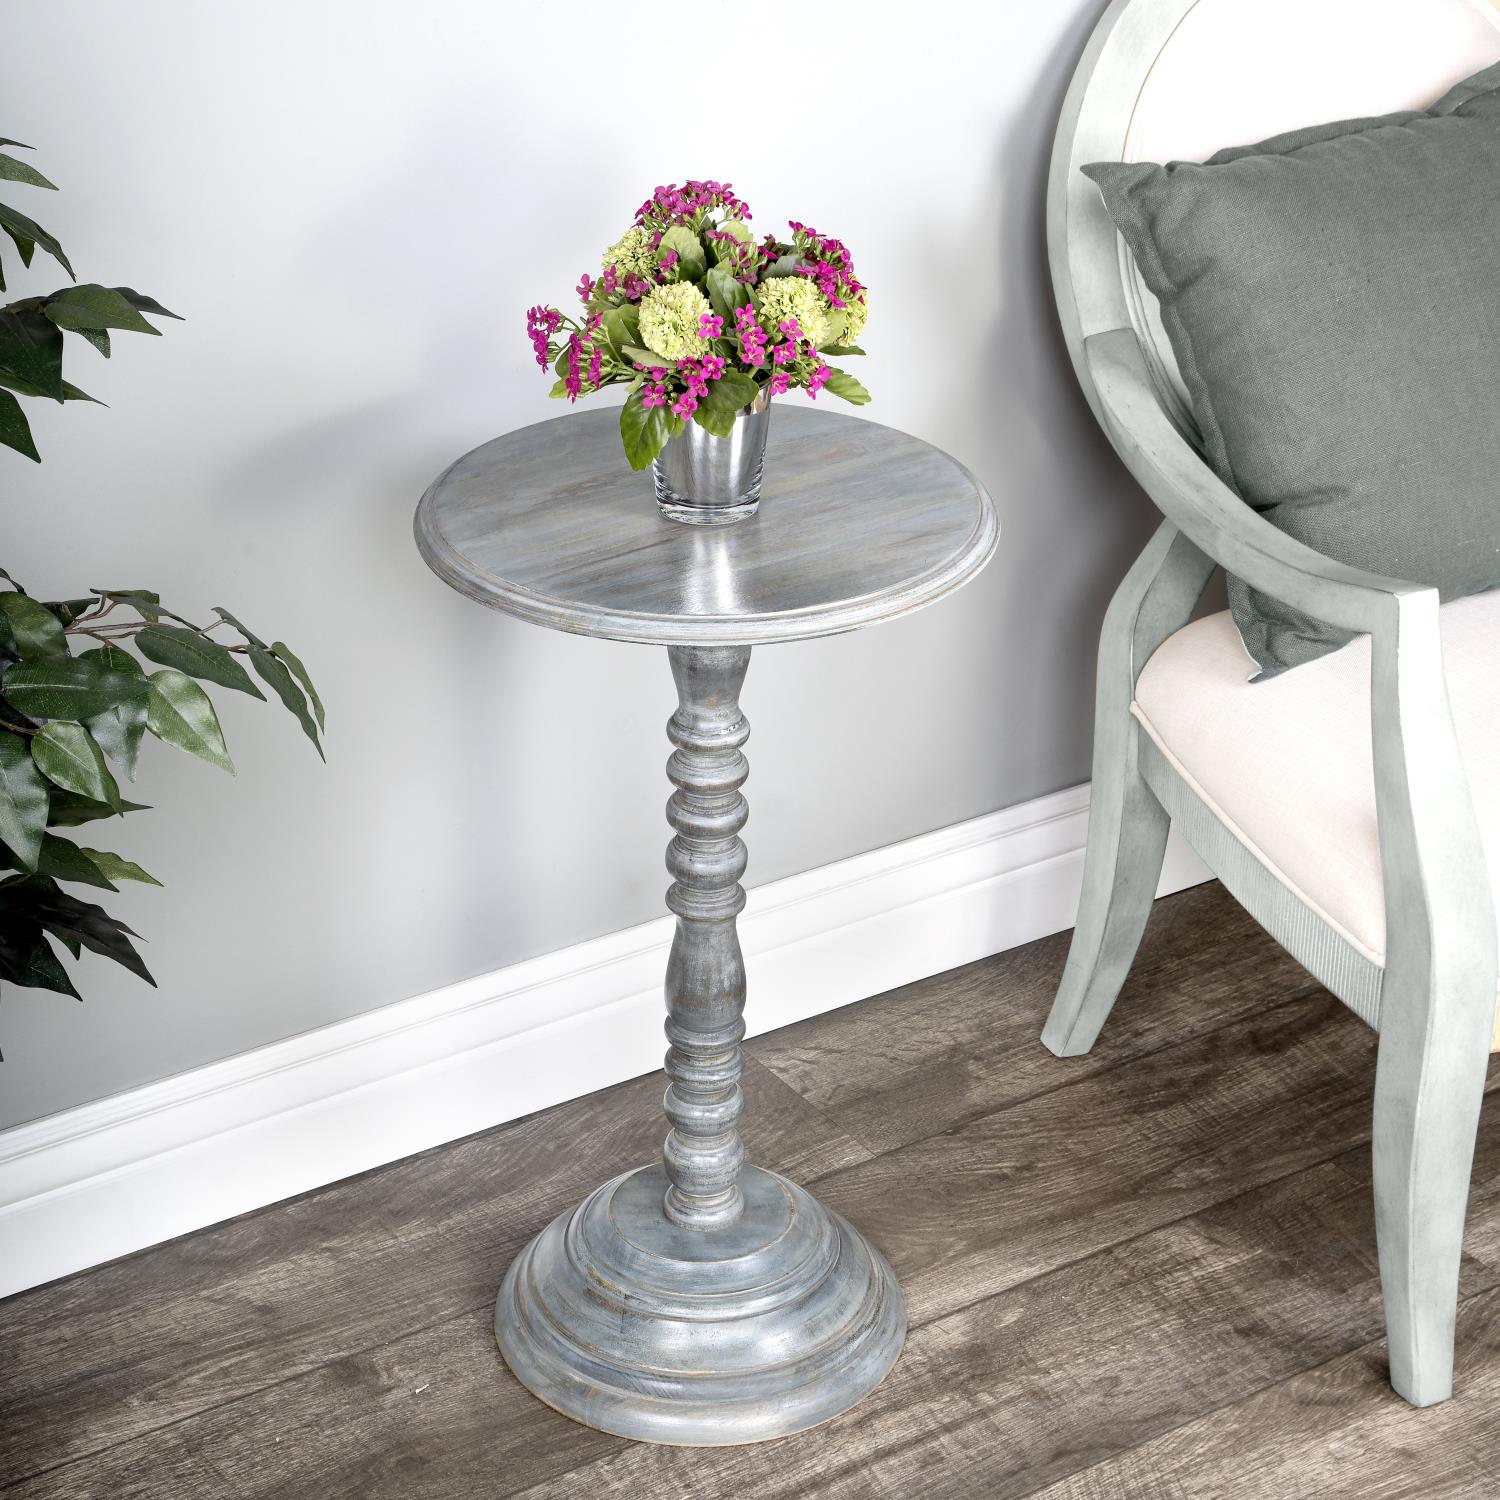 Butler Specialty Company Dani Solid Wood Pedestal 16"W Accent Table - Gray - image 5 of 7